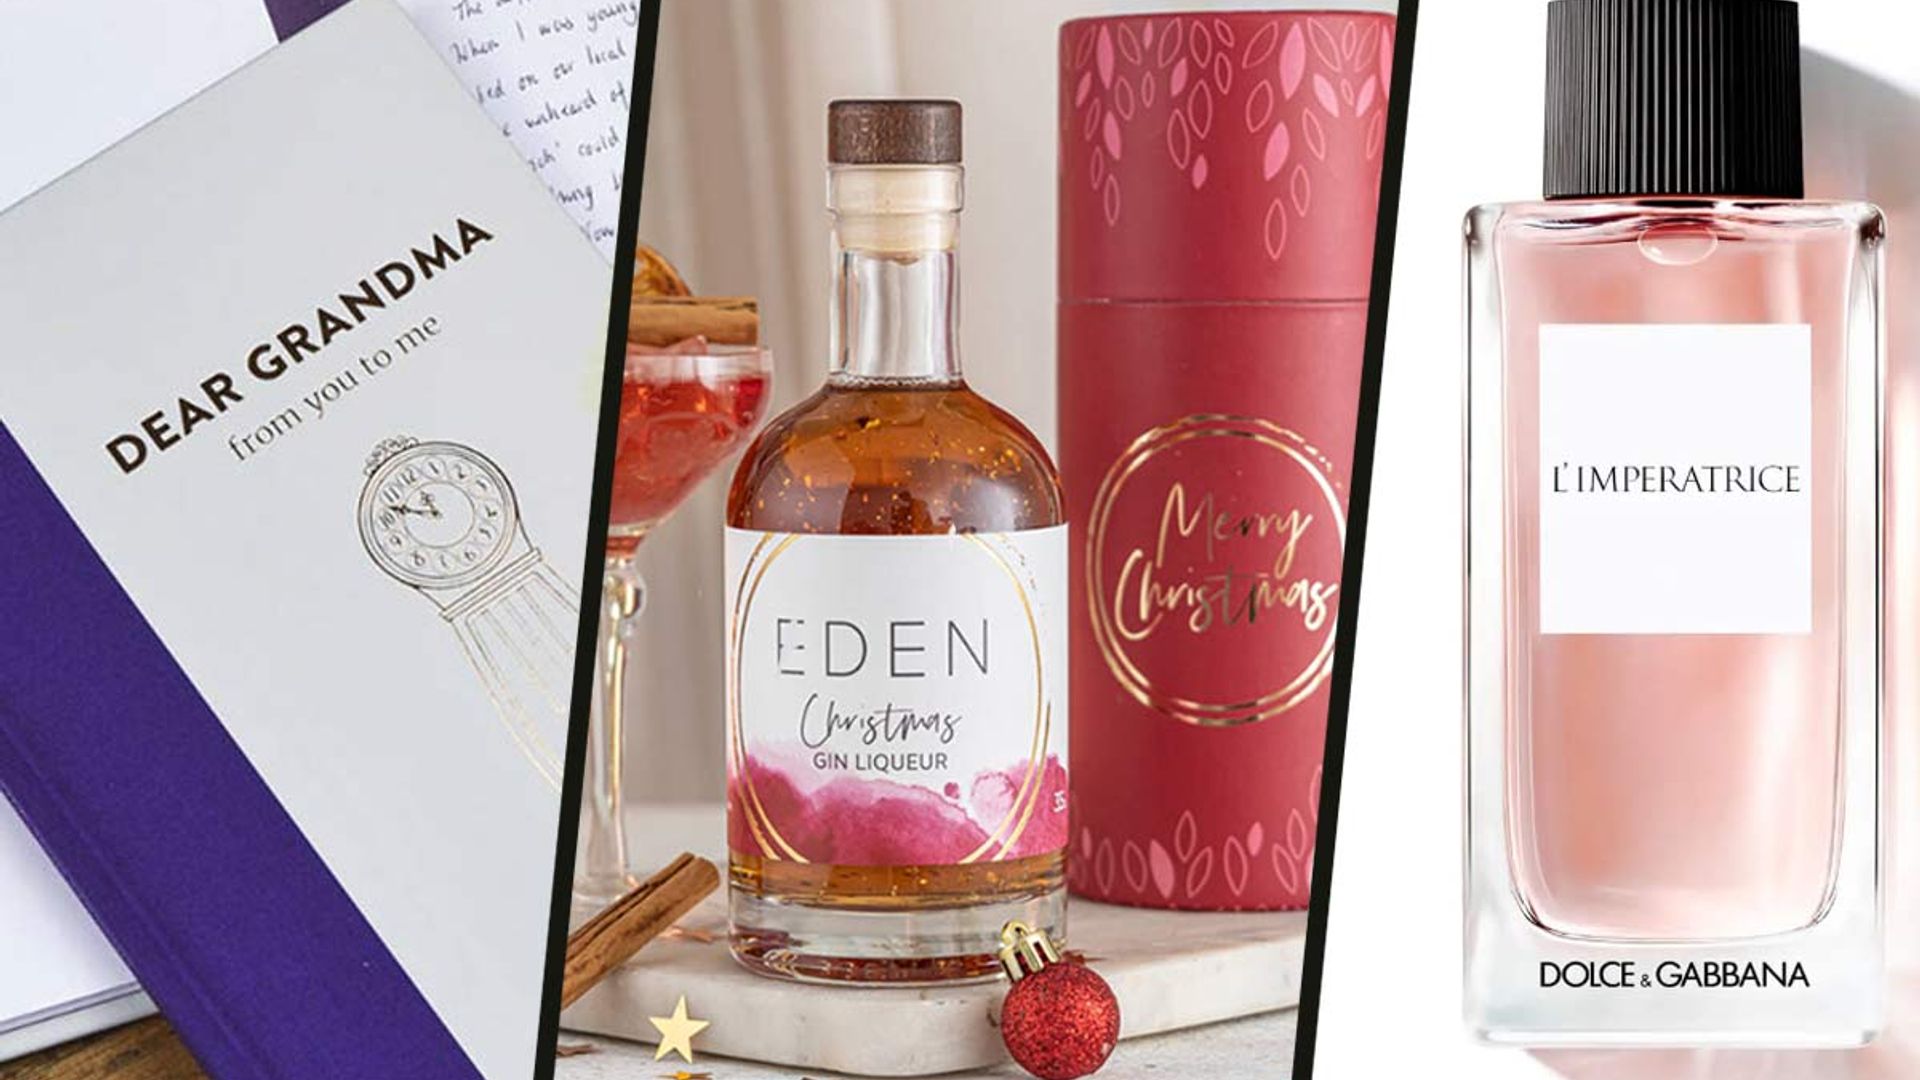 16 Christmas gifts for under £30 to treat the whole family for less